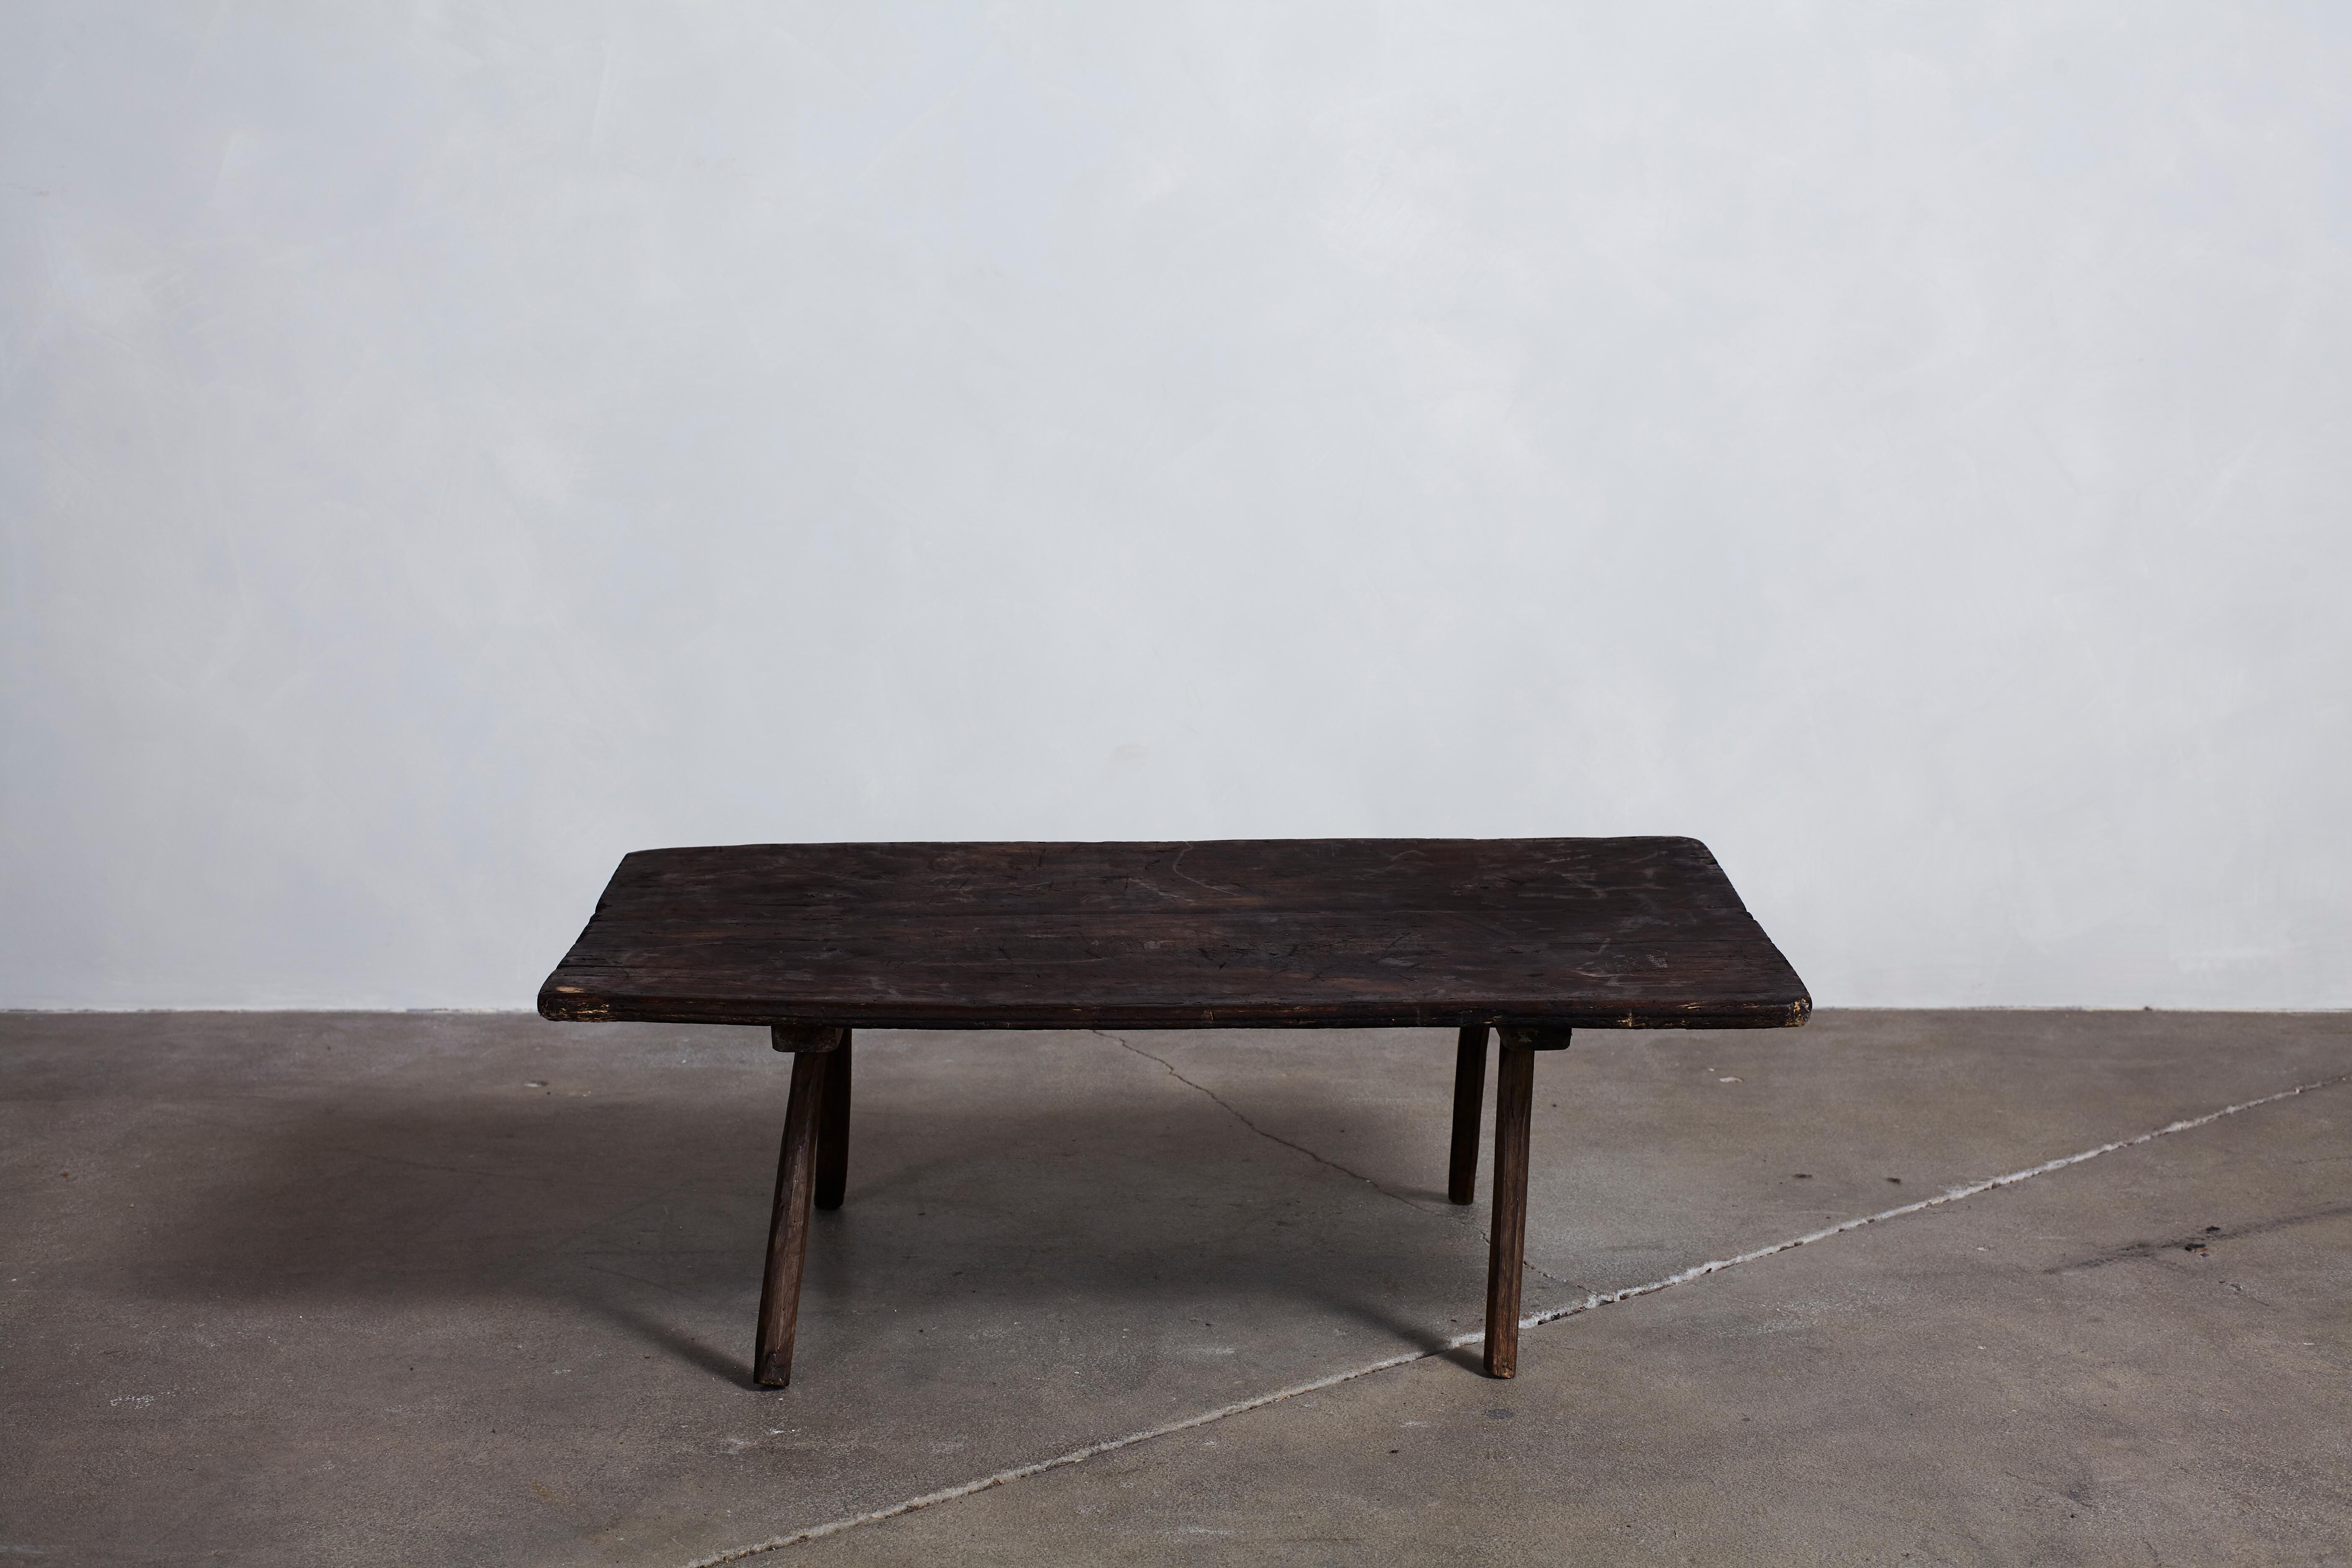 French rustic dark wooden low table with four legs.